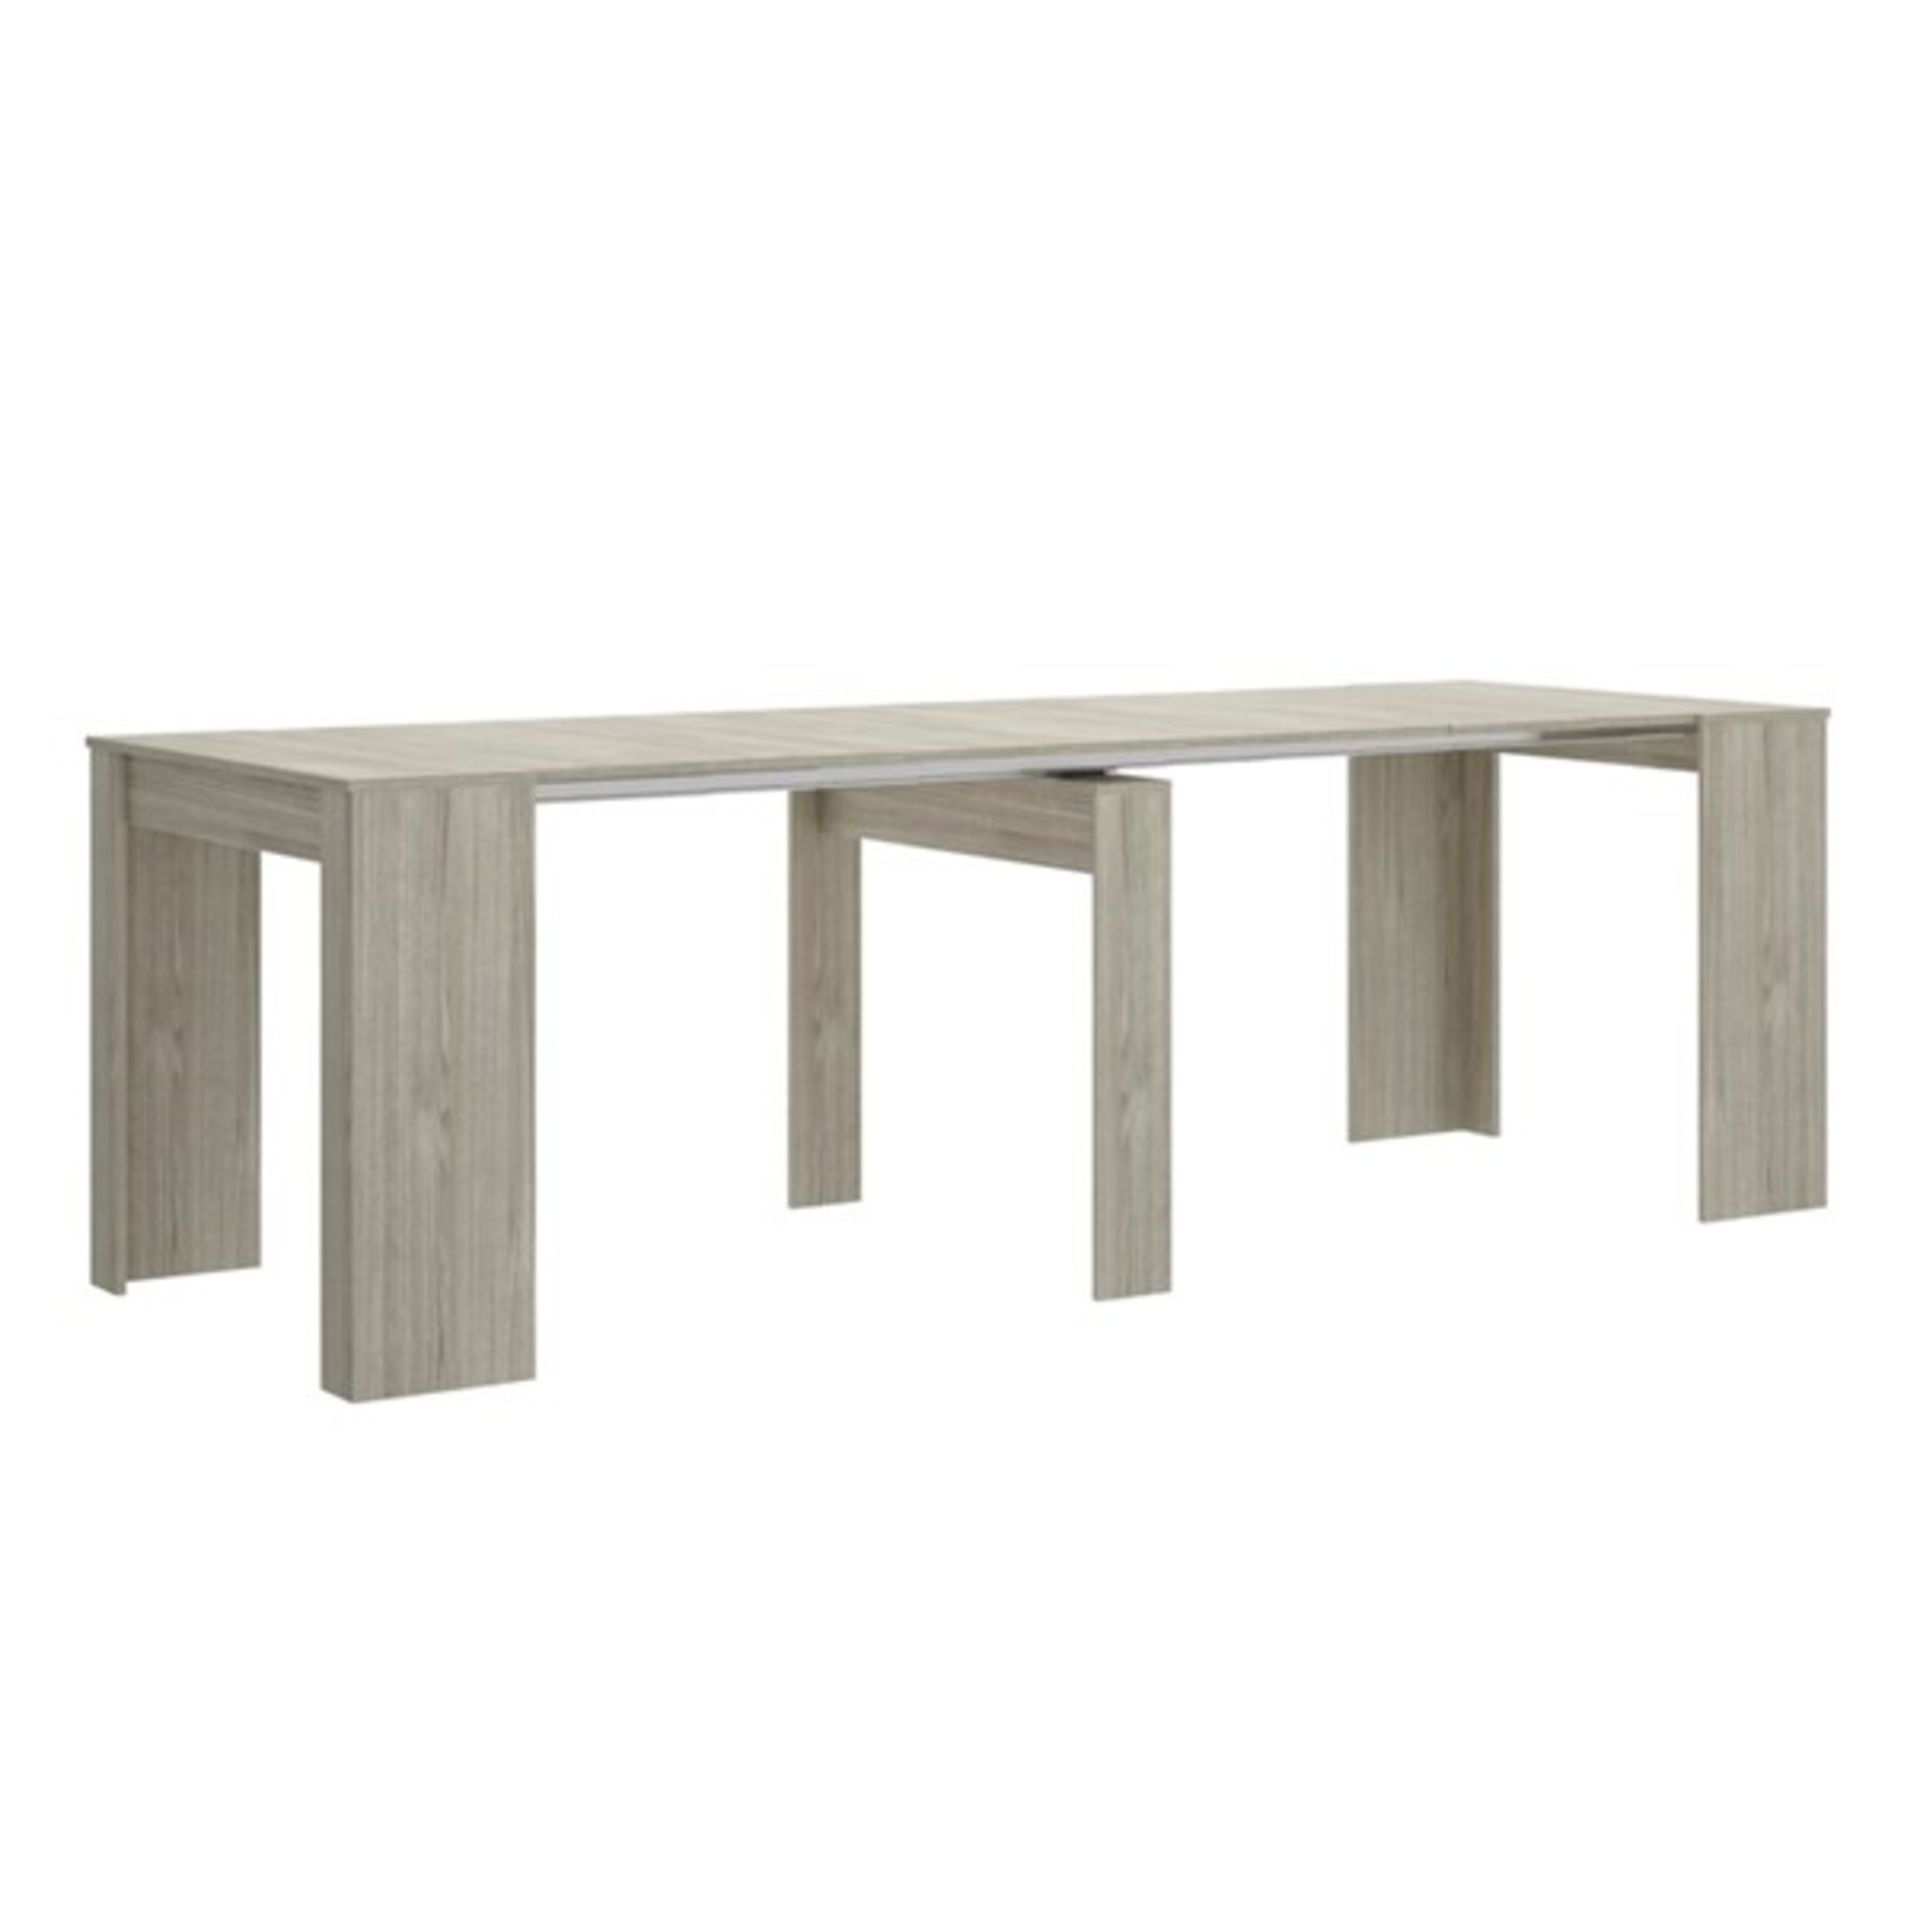 RRP £339.99 - Amabilia Extendable Dining Table - Image 2 of 4